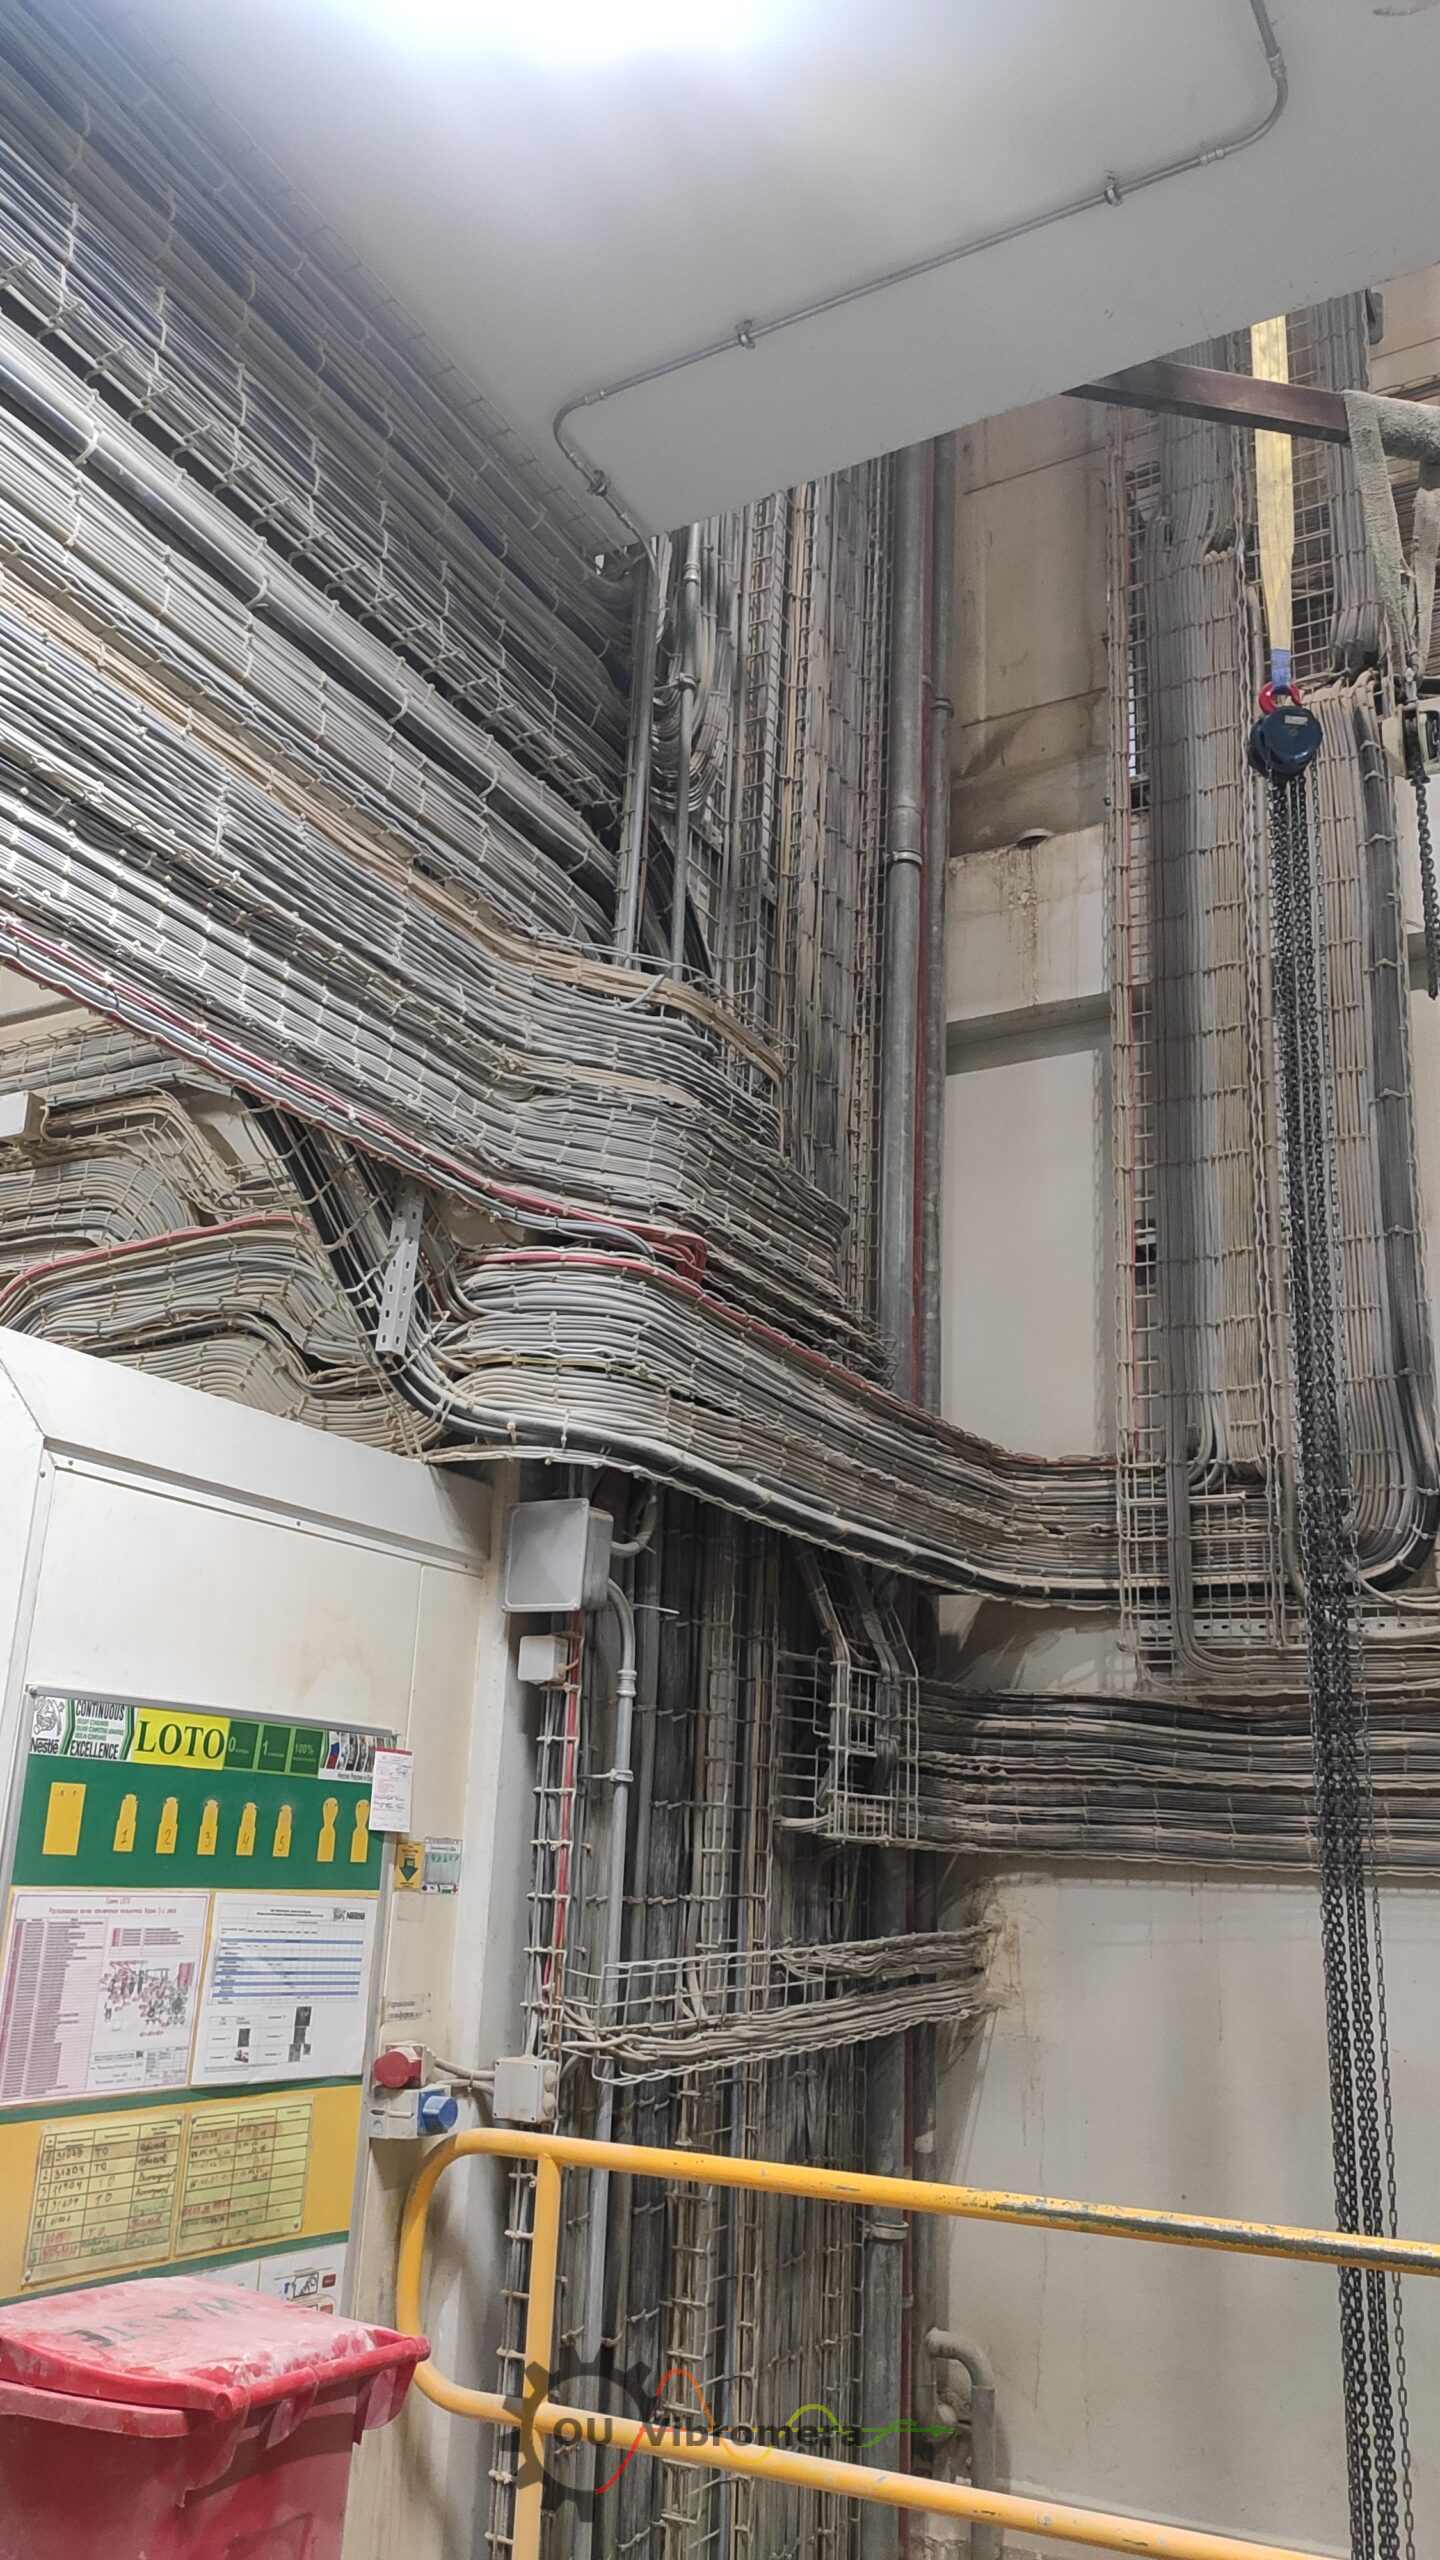 I was impressed by the structured cable system.